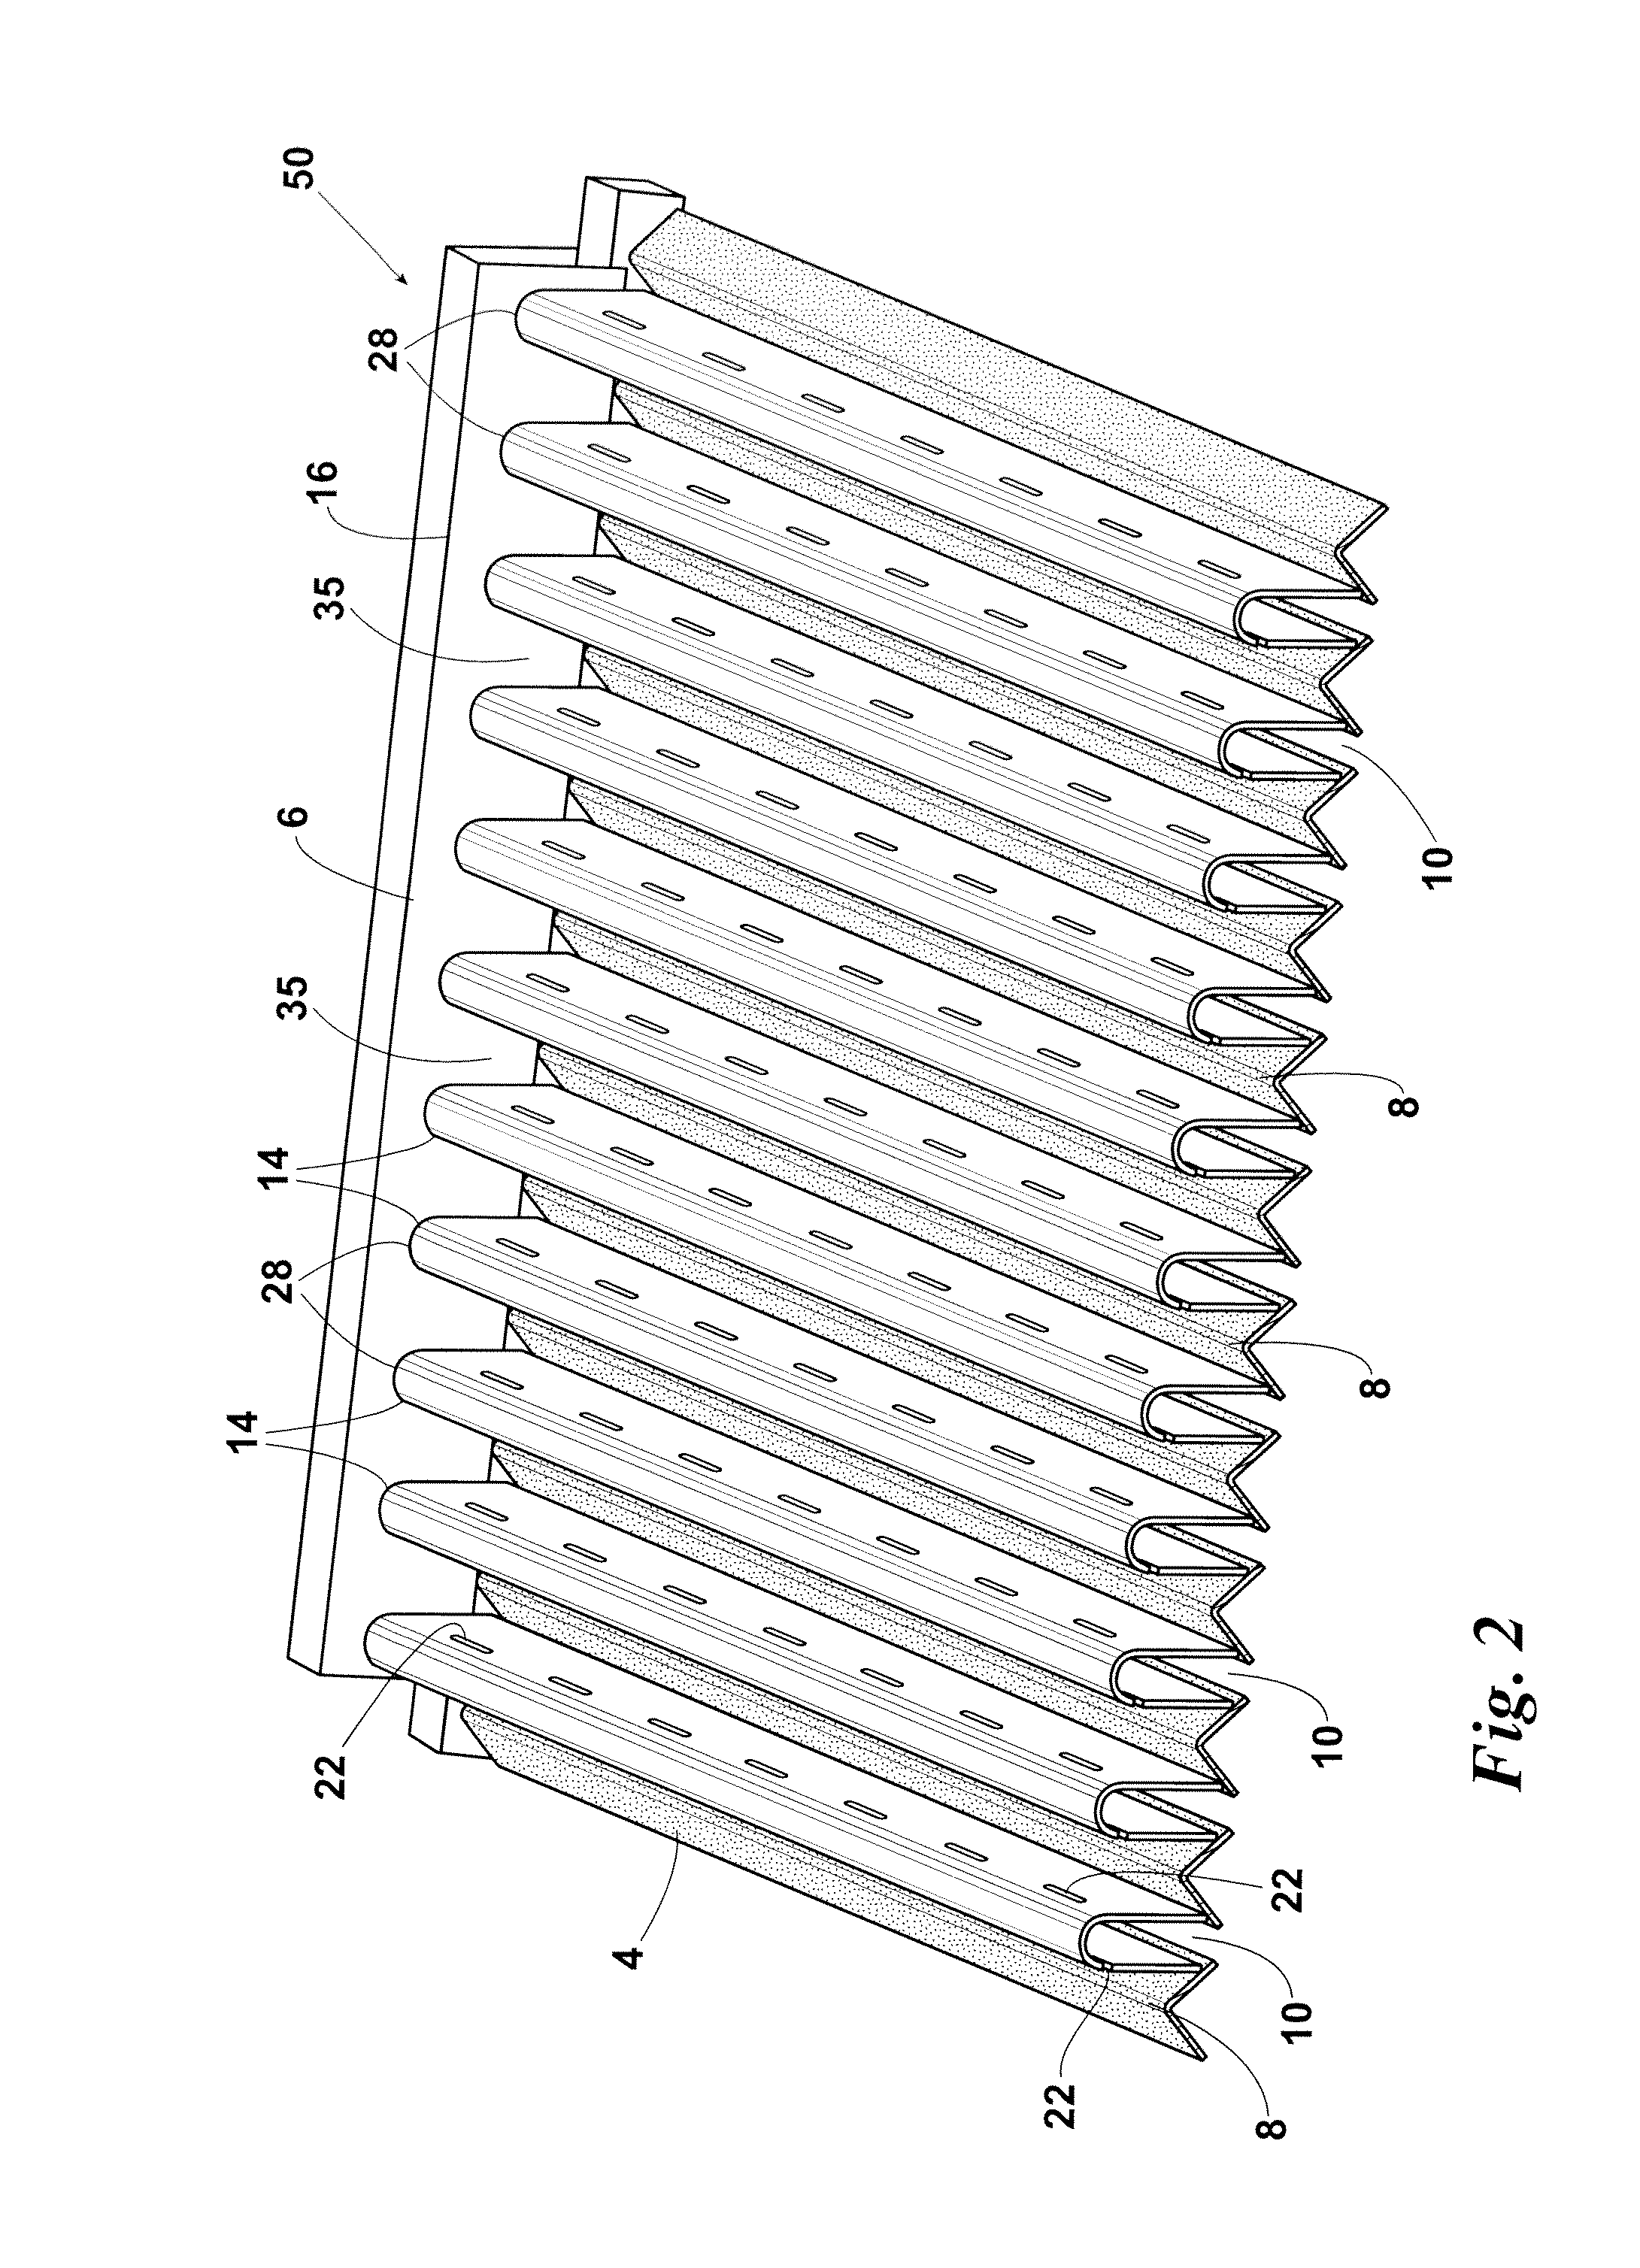 Cooking grate and cooking apparatus